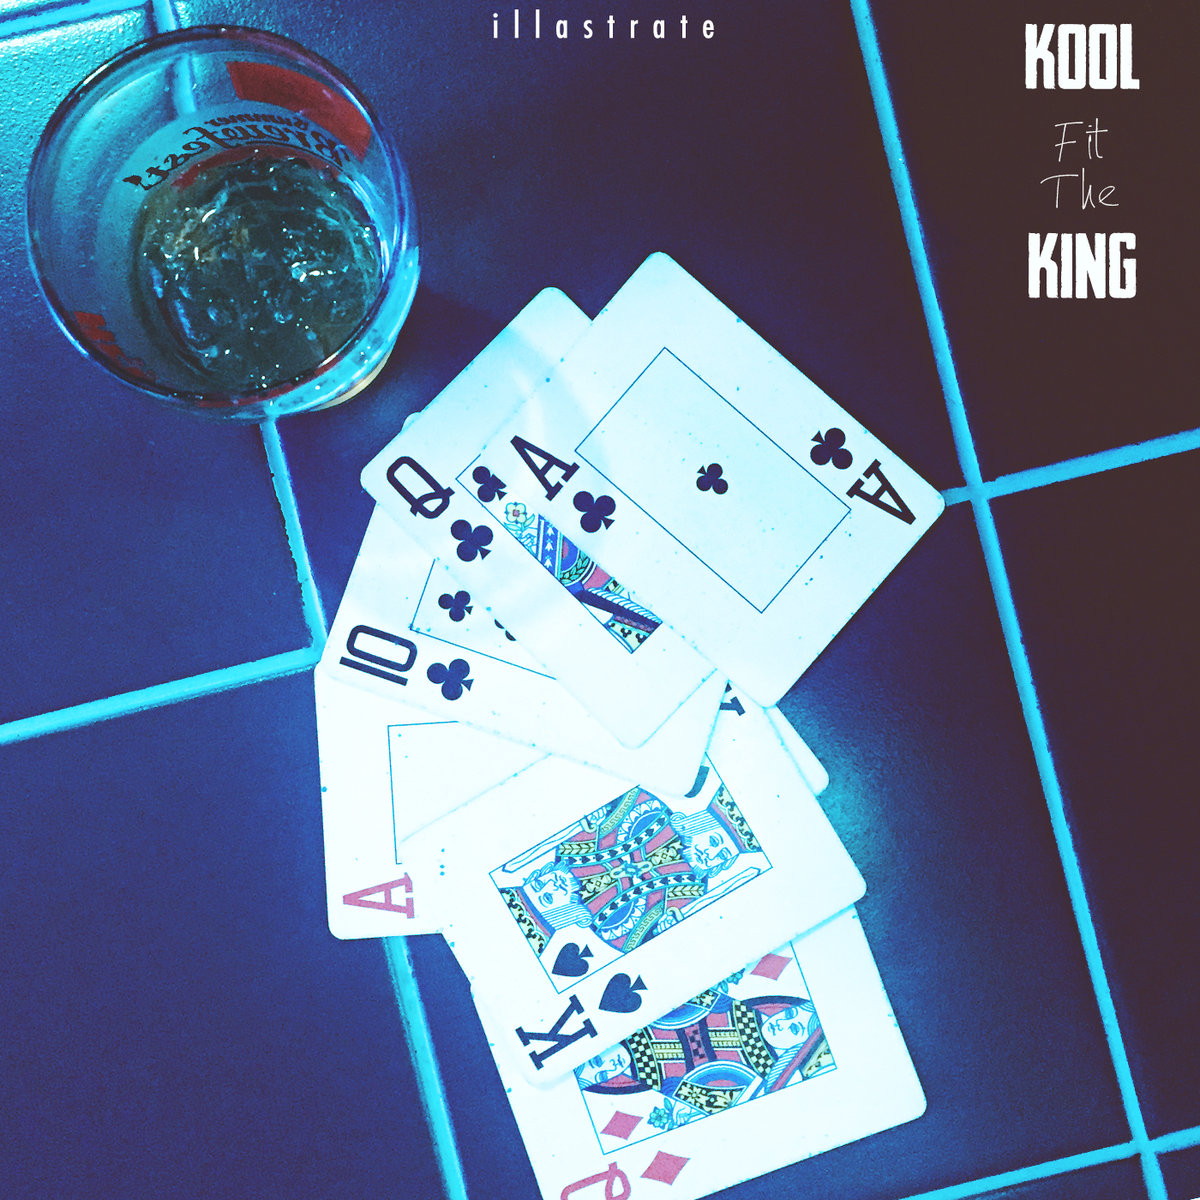 [SODD PREMIERE] Illastrate Releases “Kool Fit The King” LP